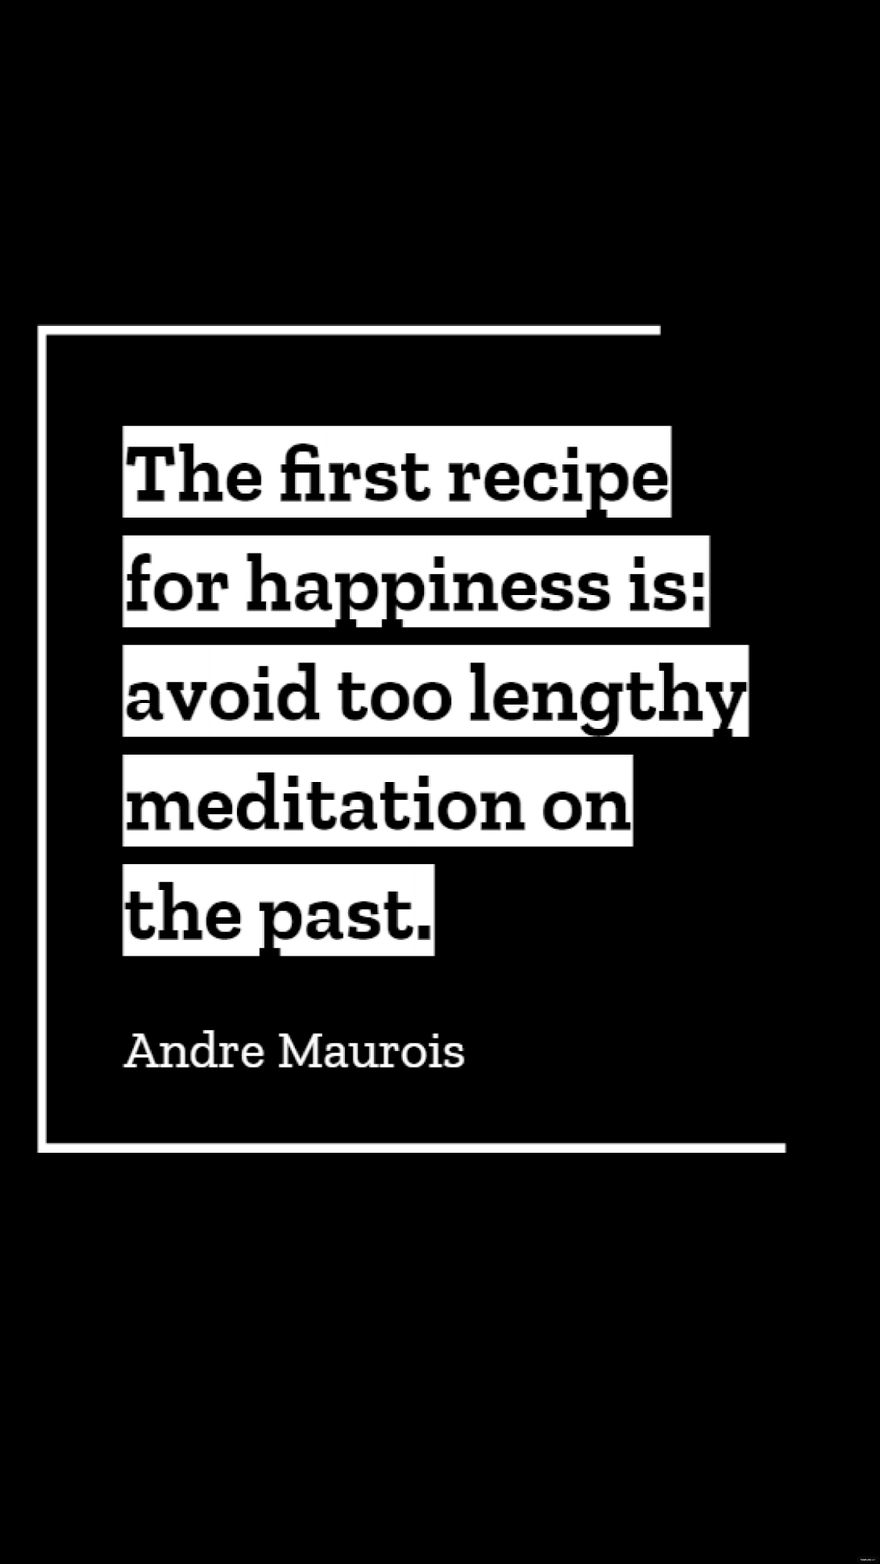 Andre Maurois - The first recipe for happiness is: avoid too lengthy meditation on the past.